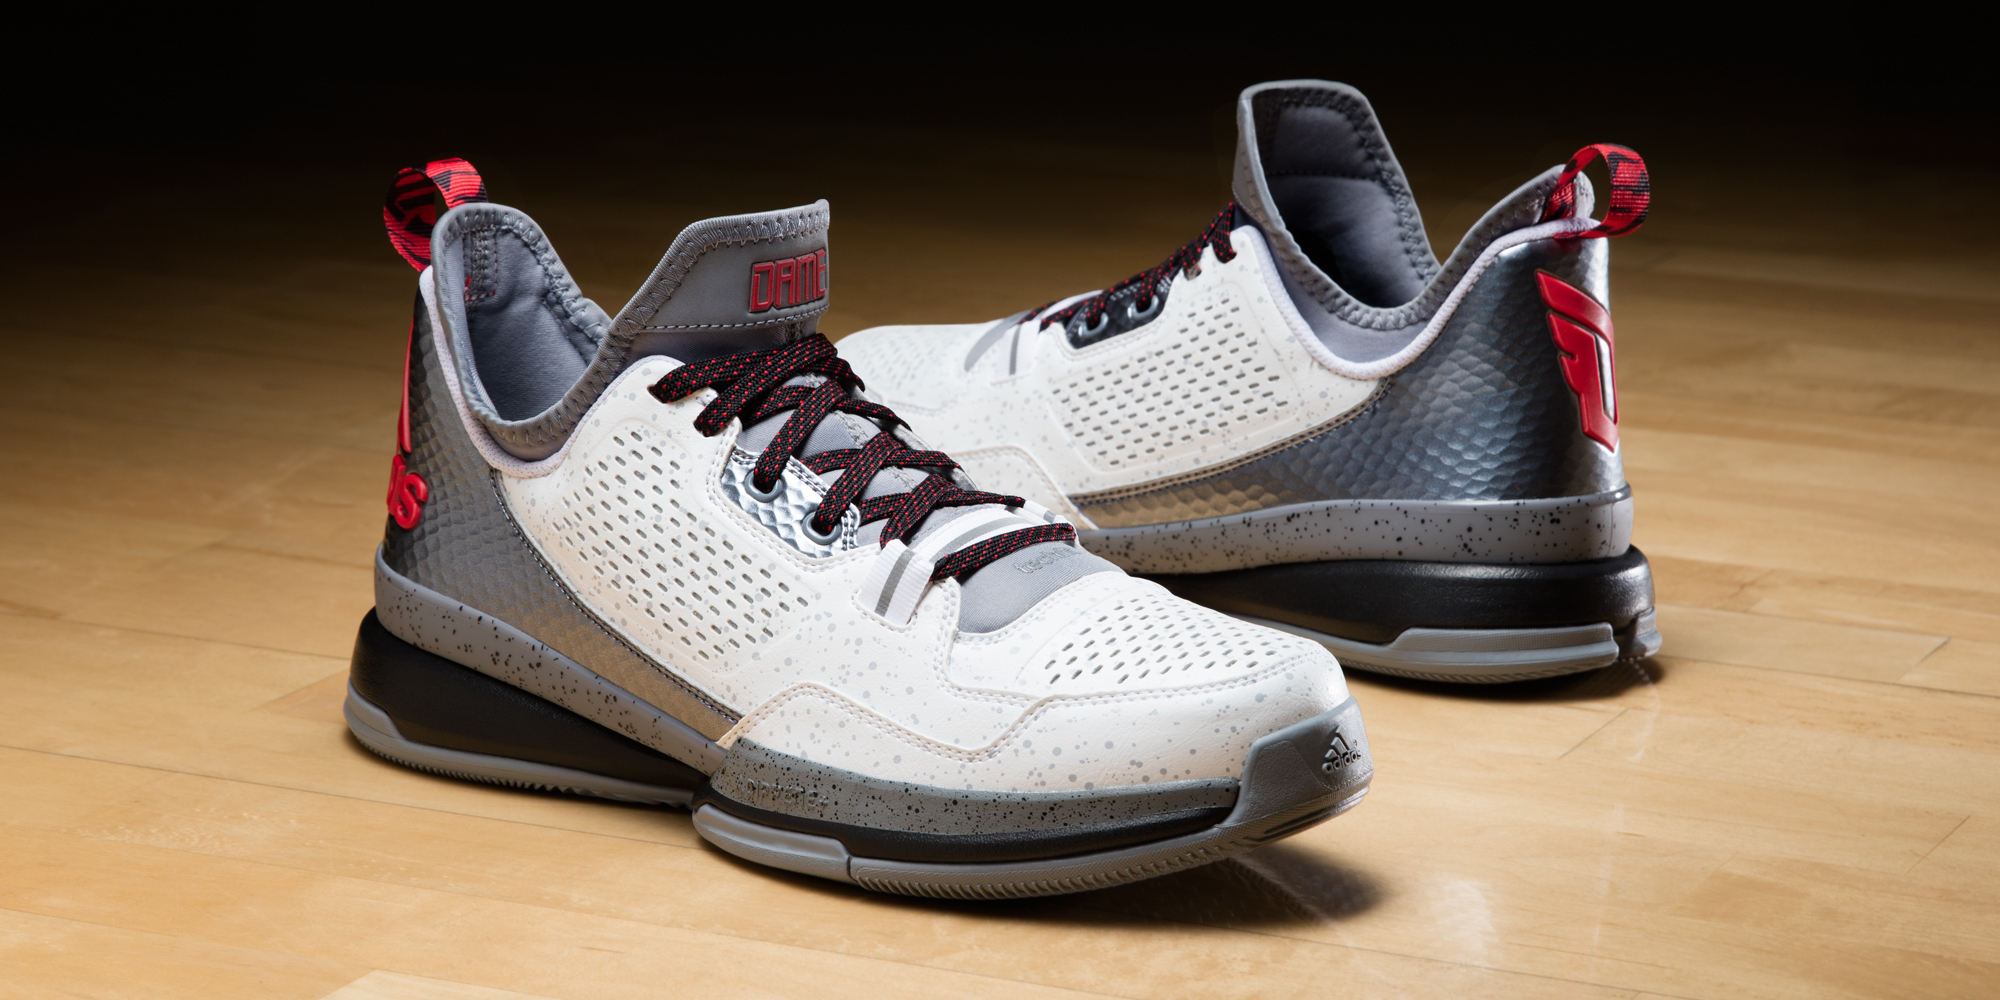 Damian Lillard Gears up for The Season with New Home and Away 